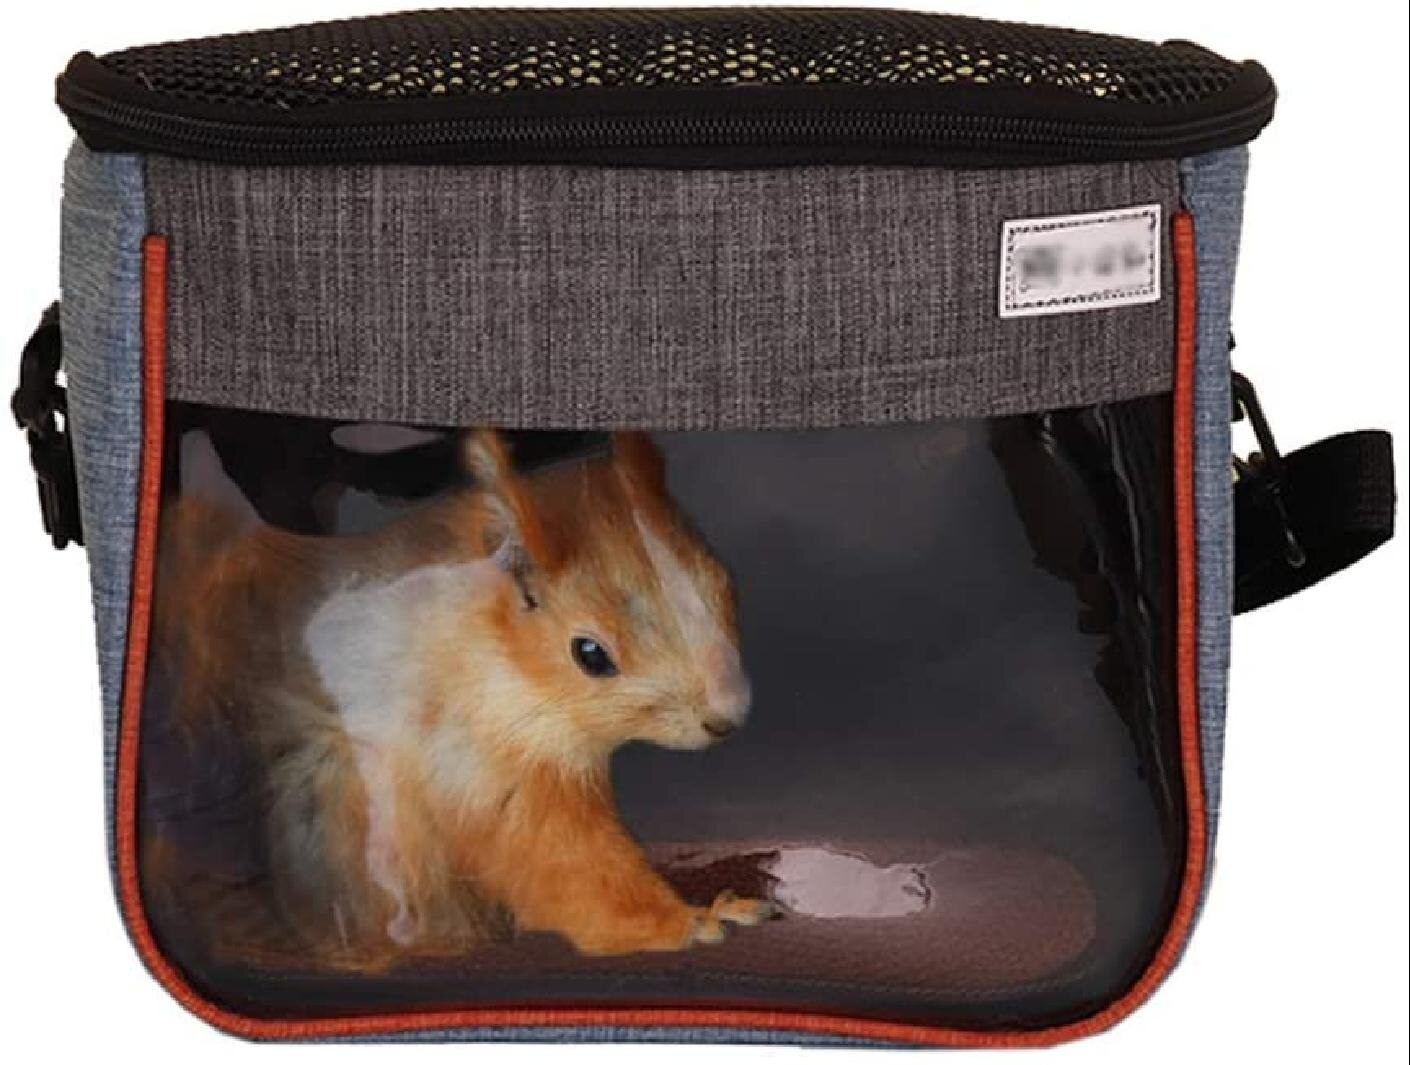 Red Hamster Carrier Bag Portable Breathable Pet Outgoing Bag with Clear Window for Squirrel Hedgehog Small Pets 